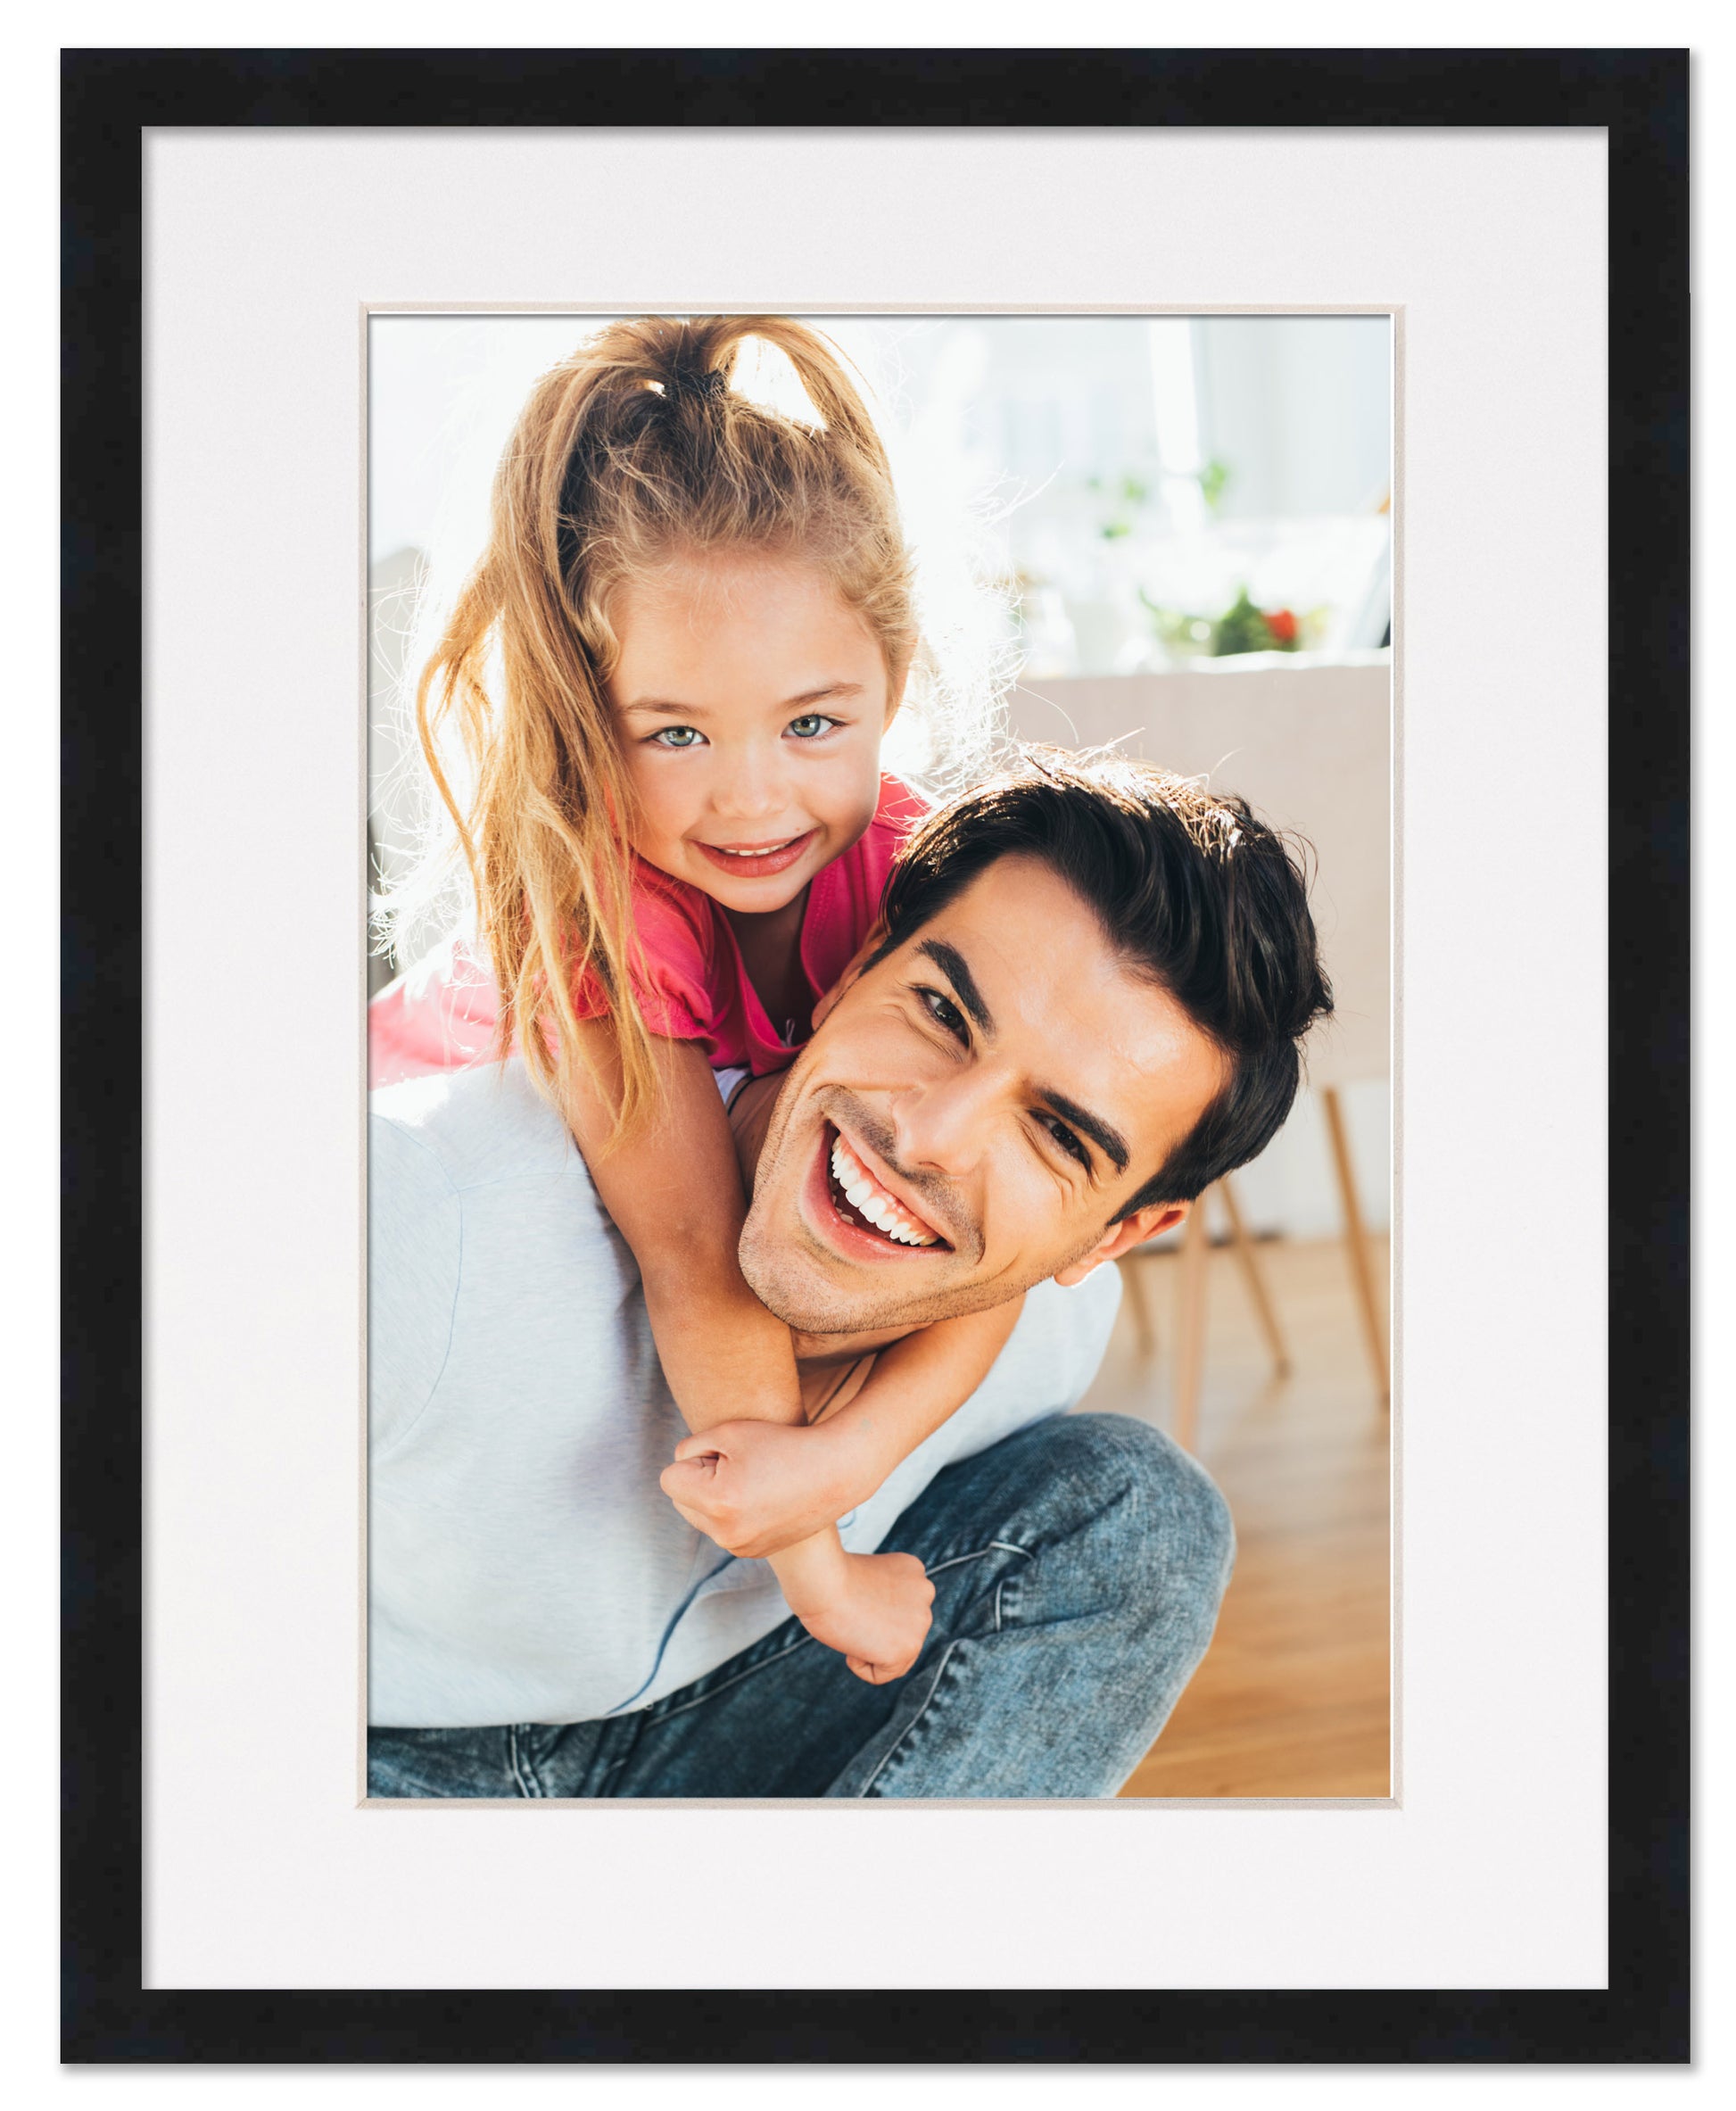 11x14 Picture Frame Set of 6, Display 8x10 Pictures with Mat or 11x14  without Mat for Tabletop Display and Wall Hanging, Classic Simple Photo  Frames